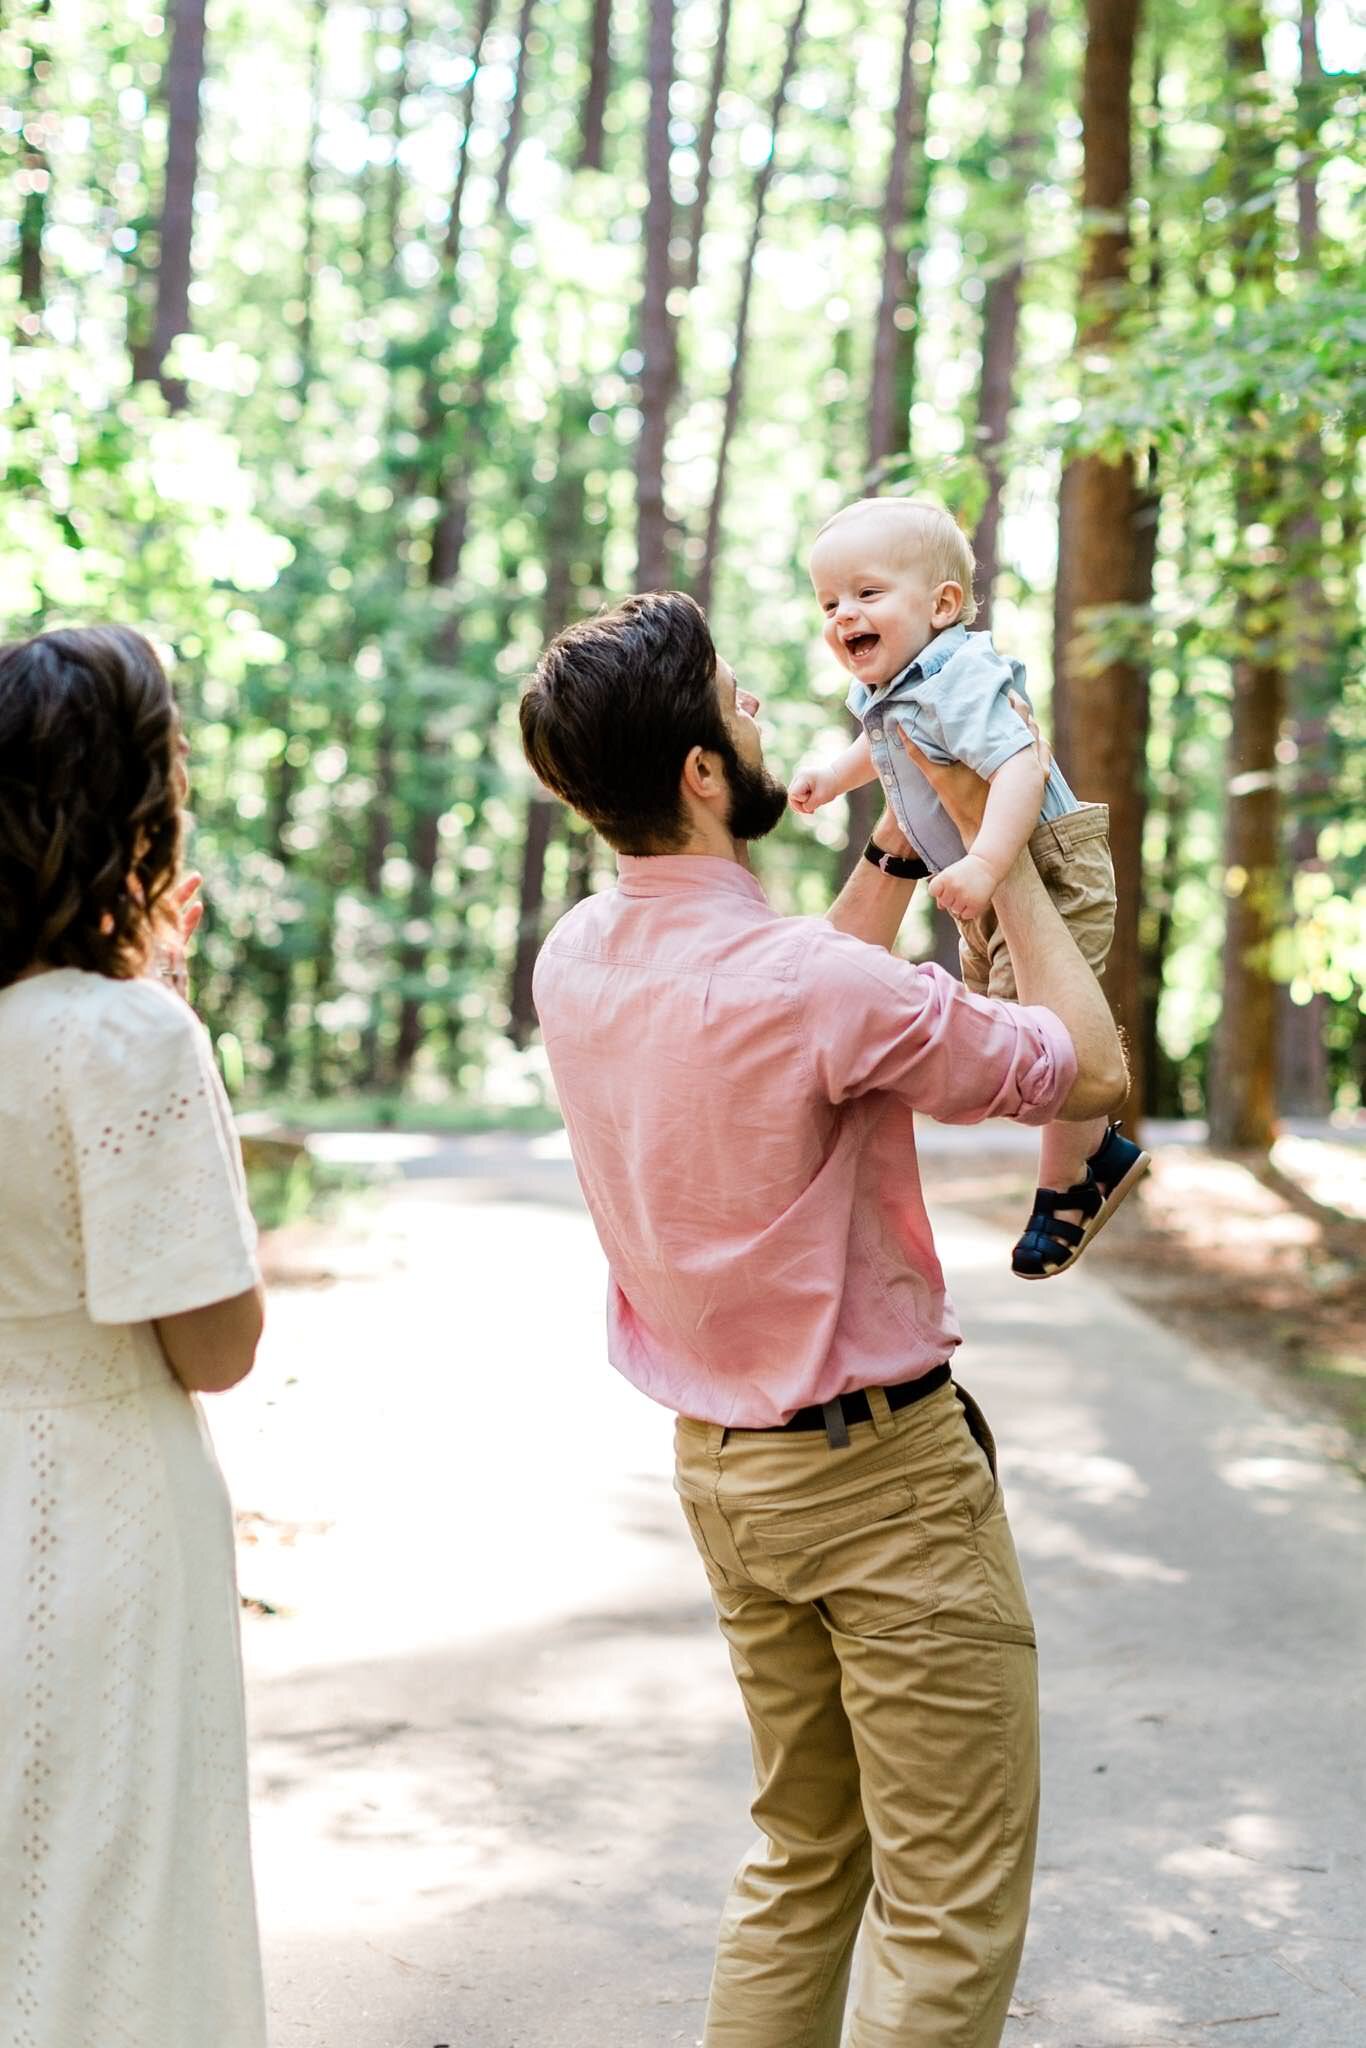 Raleigh Family Photographer | By G. Lin Photography | Umstead Park | Father holding son and laughing